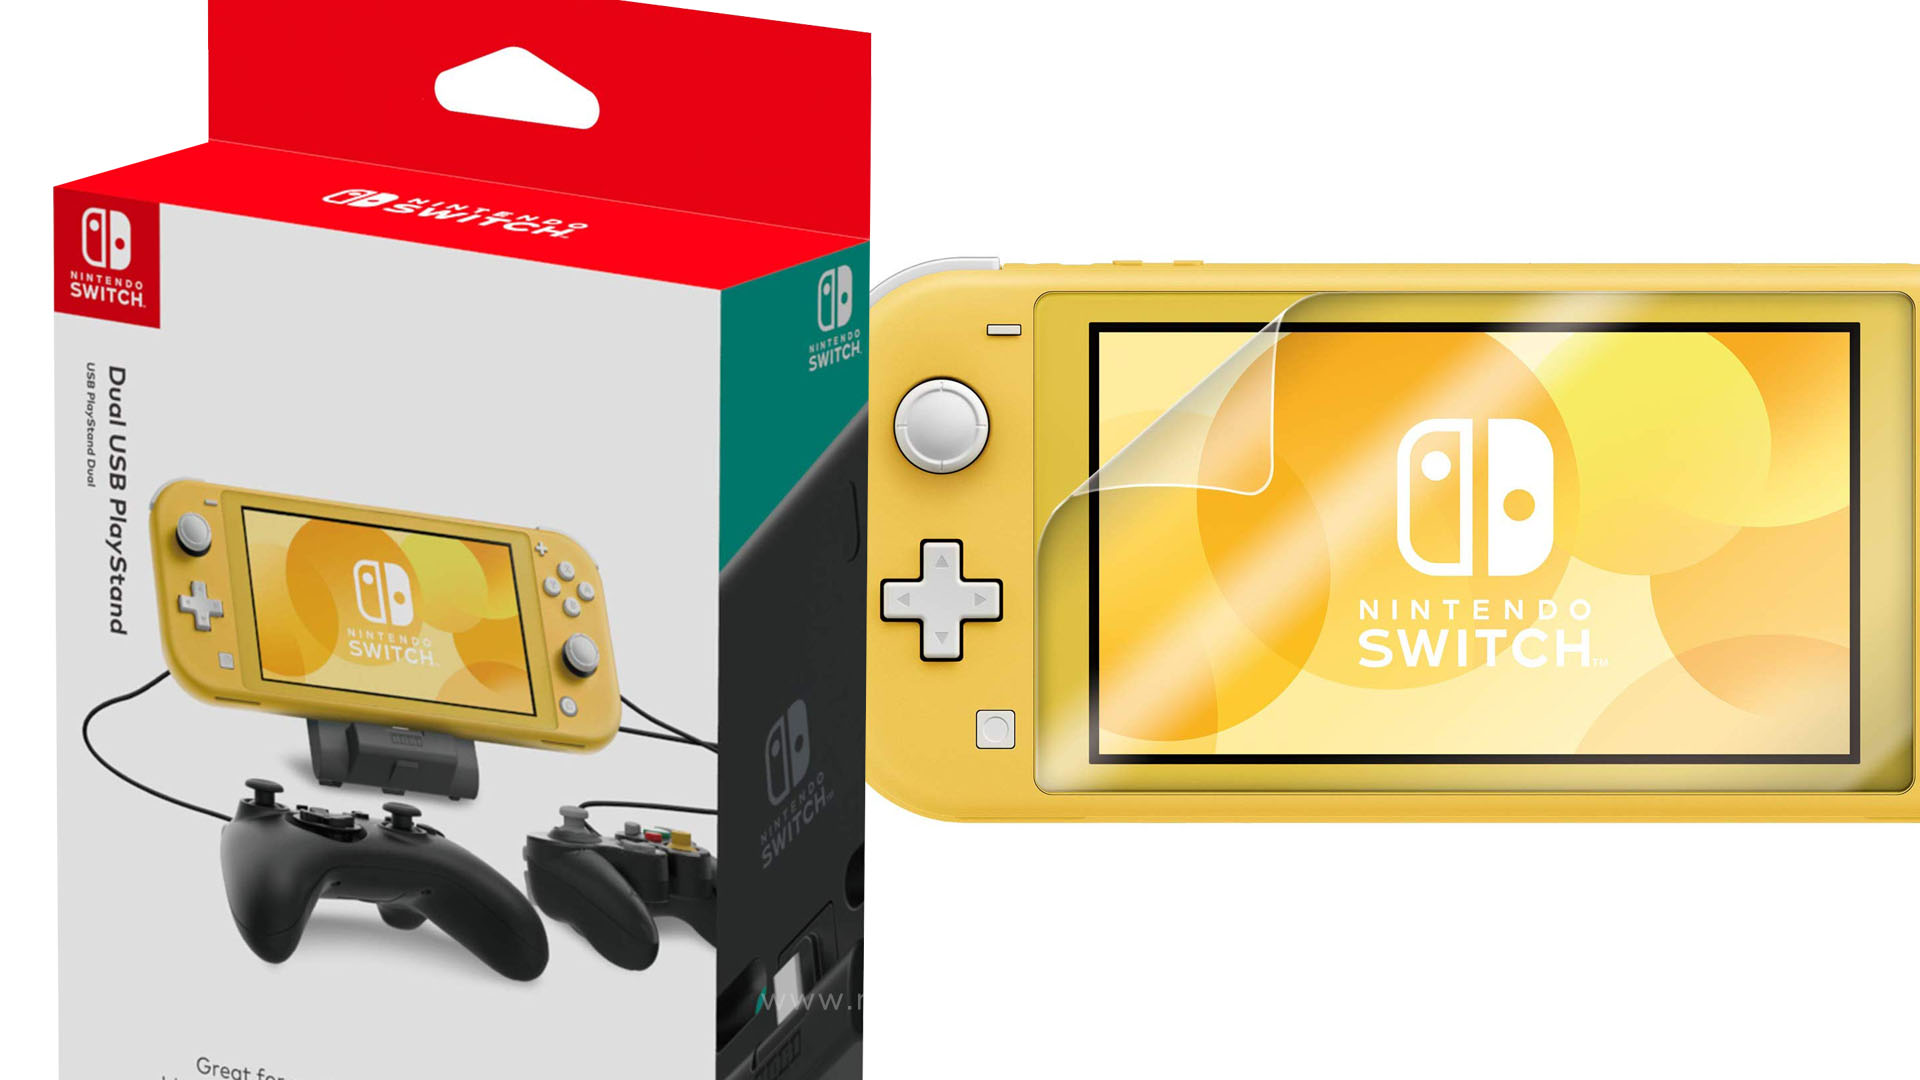 accessories for nintendo switch lite